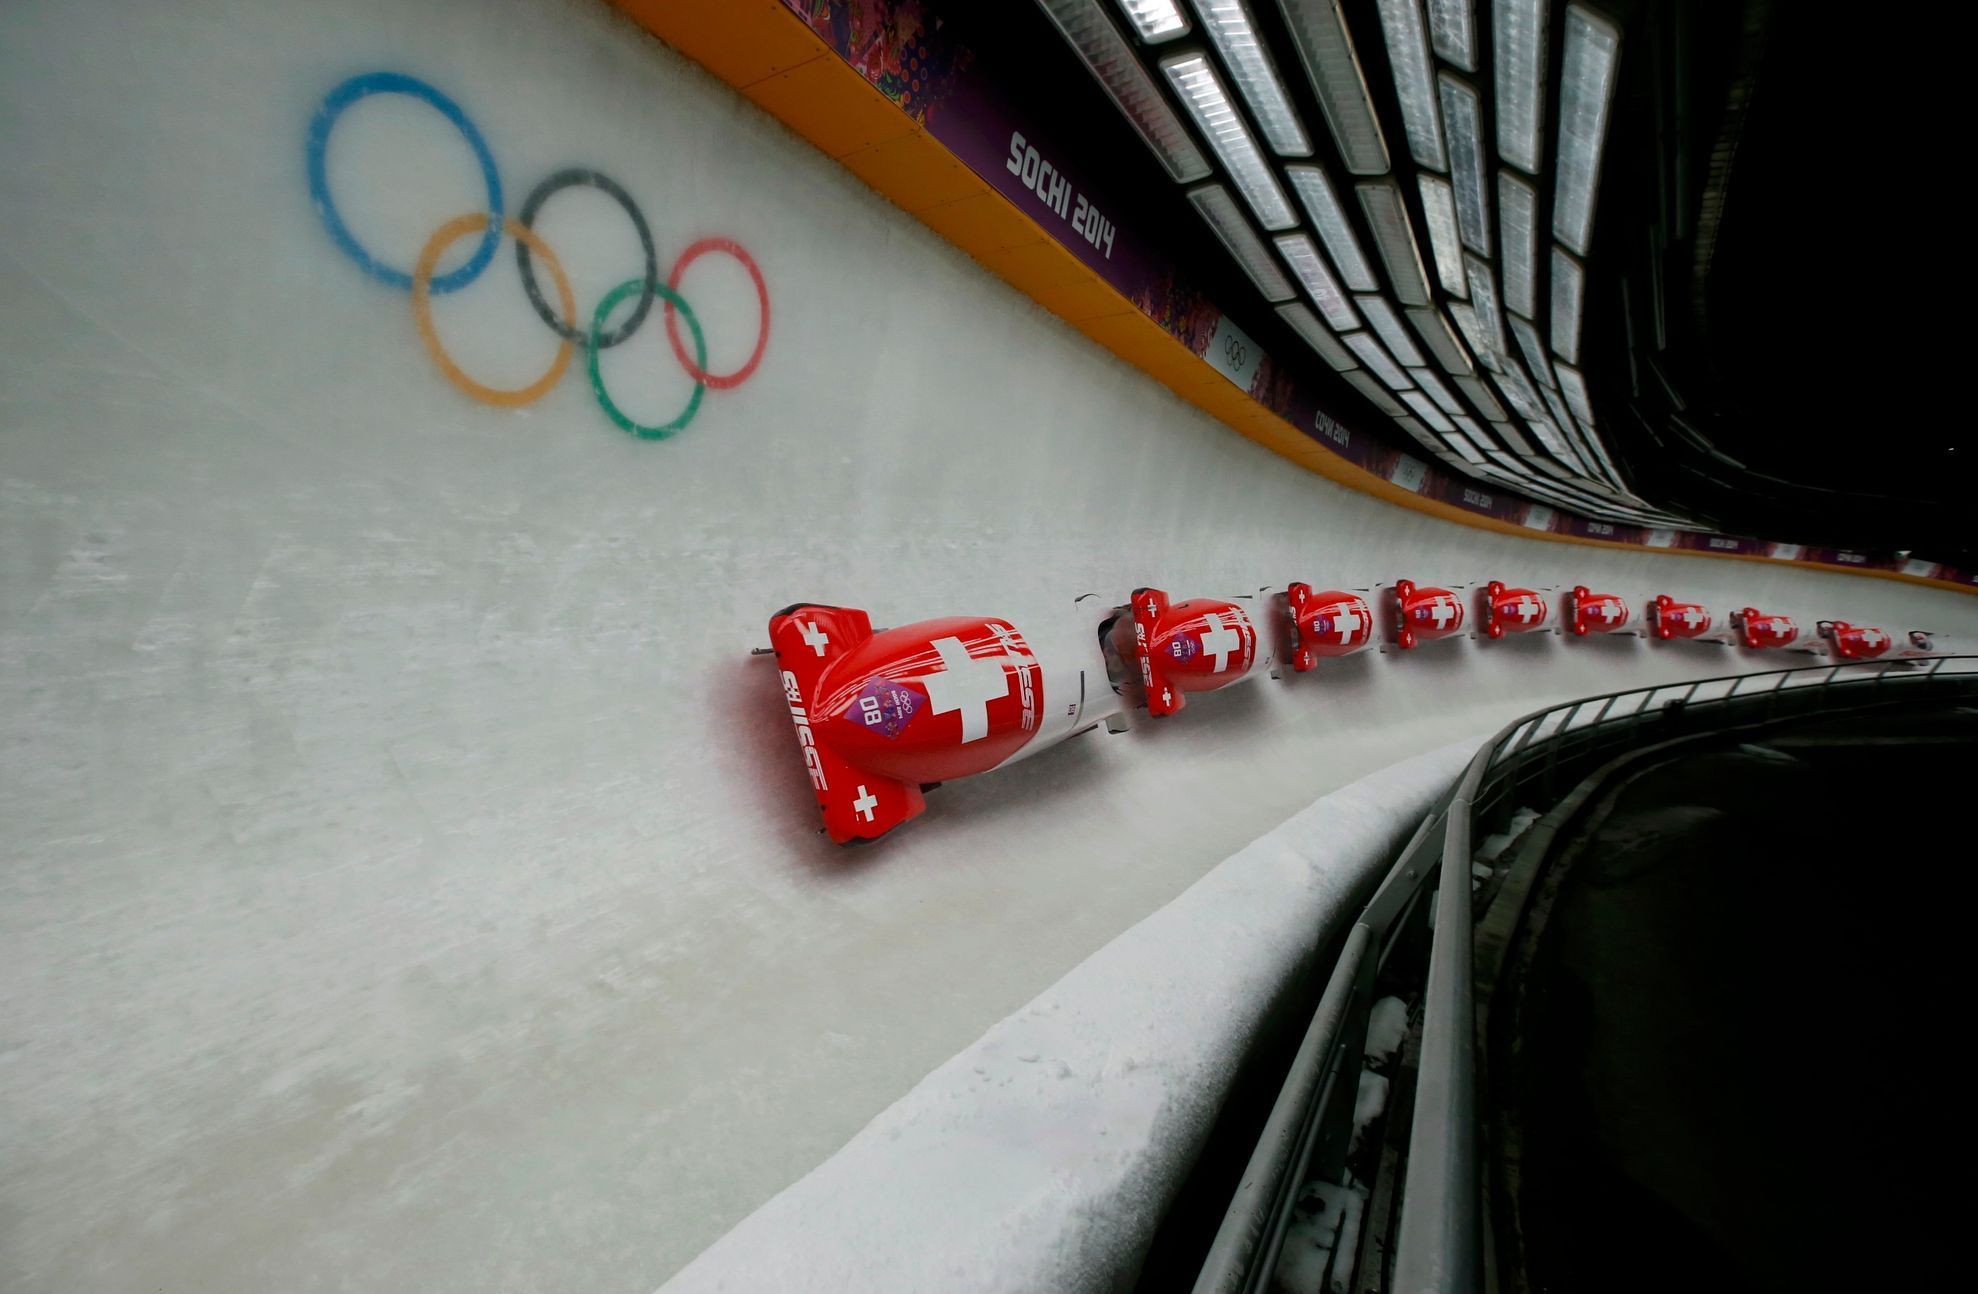 Switzerland's pilot Meyer and Mayer speed down the track during the women's bobsleigh event at the 2014 Sochi Winter Olympics